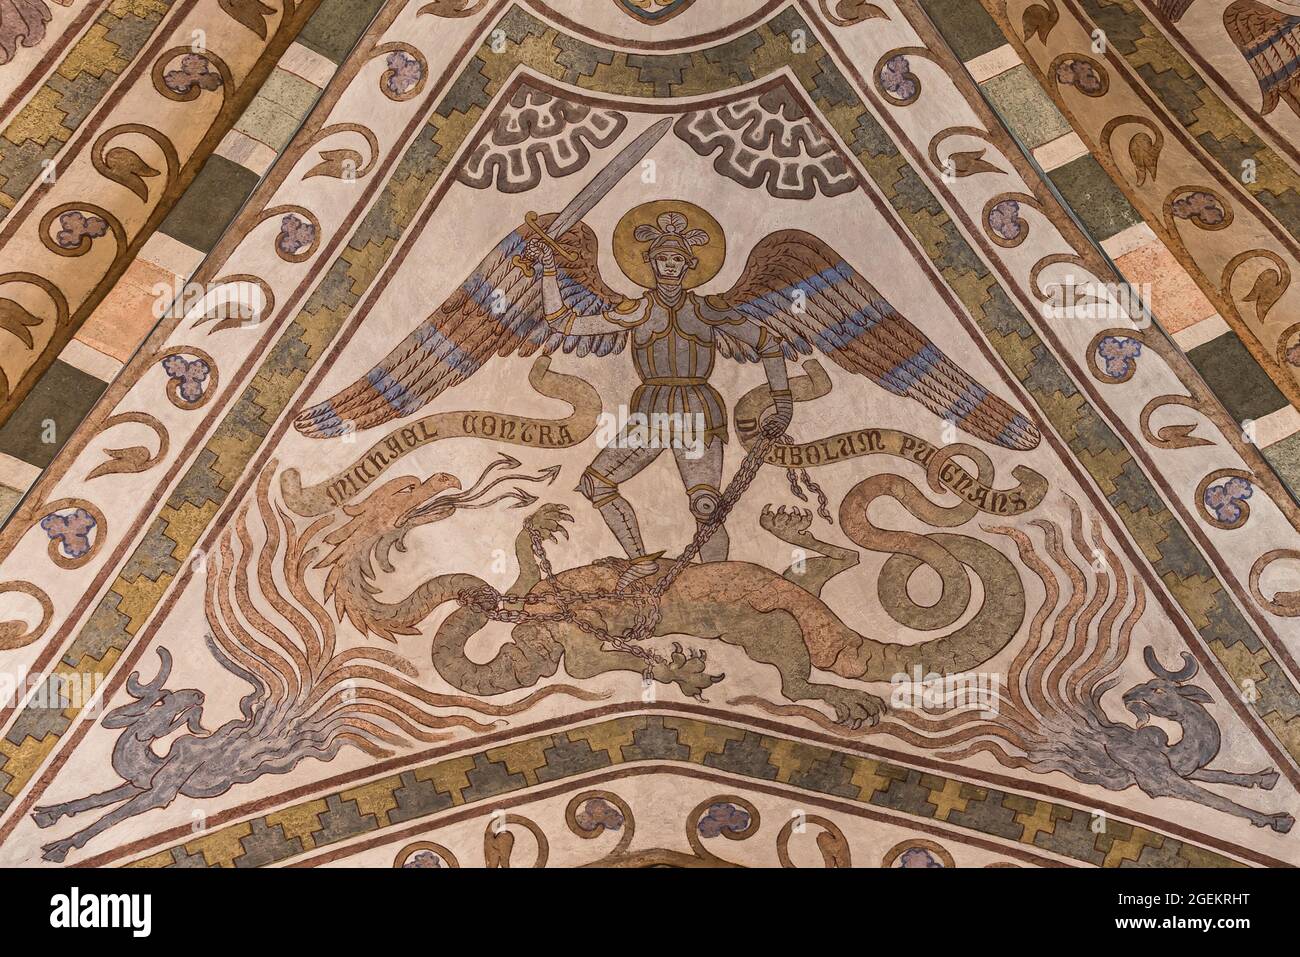 the archangel michael in armor lifts his sword and kills the dragon, fresco from the 1300s in St. Kopinge church, Sweden, July 16, 2021 Stock Photo